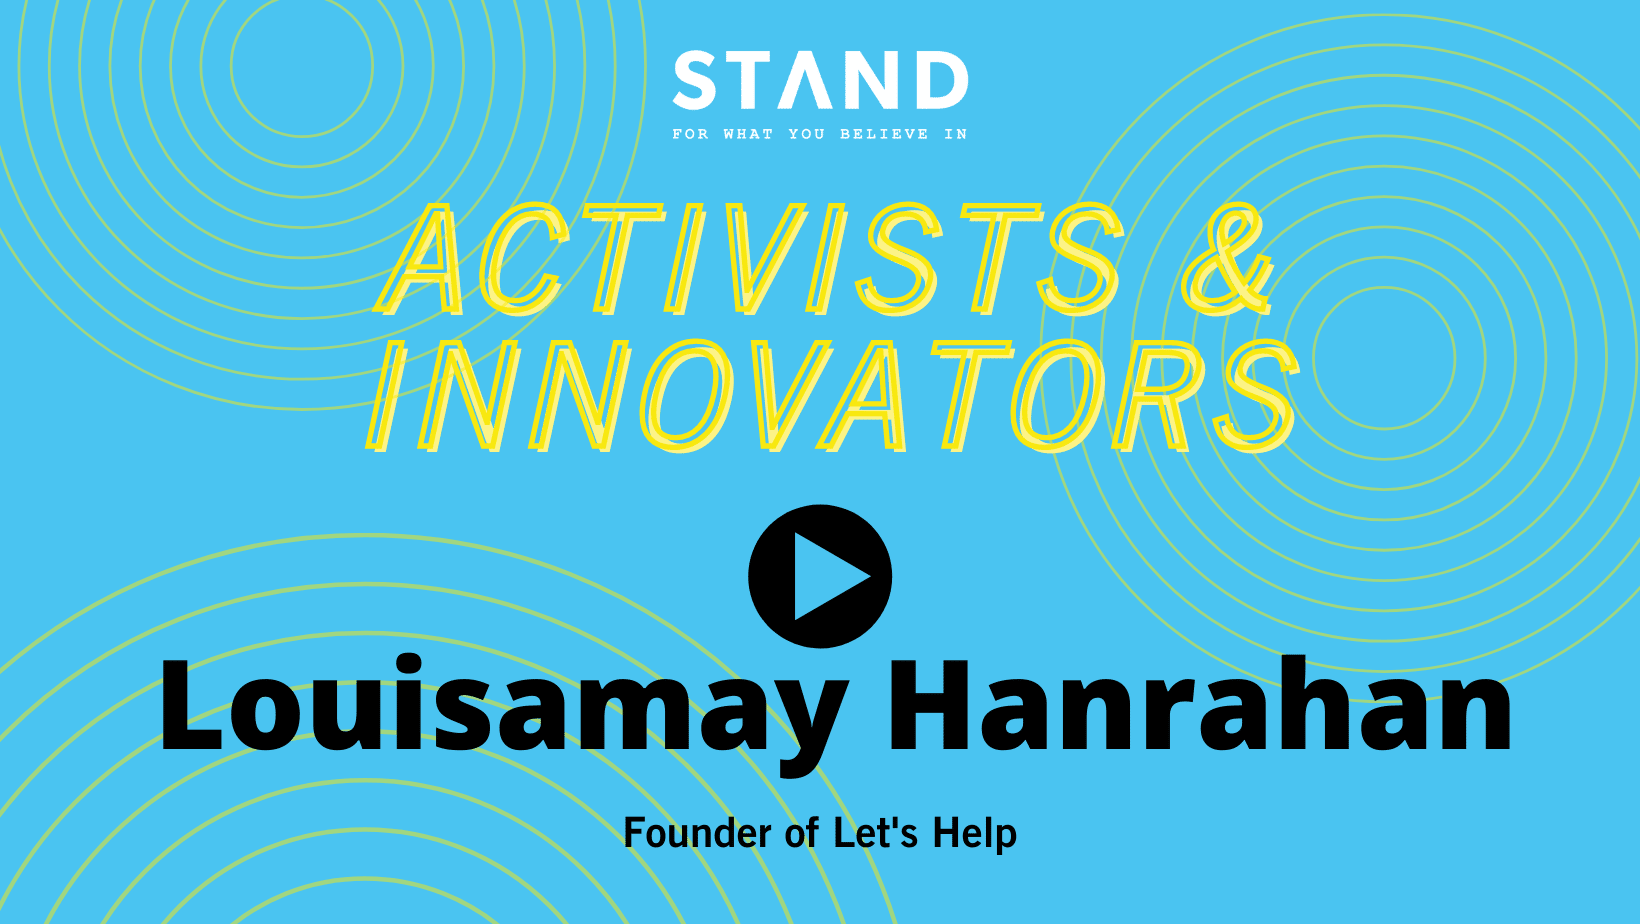 Activists and Innovators, Louisamay Hanrahan - founder of Let's Help